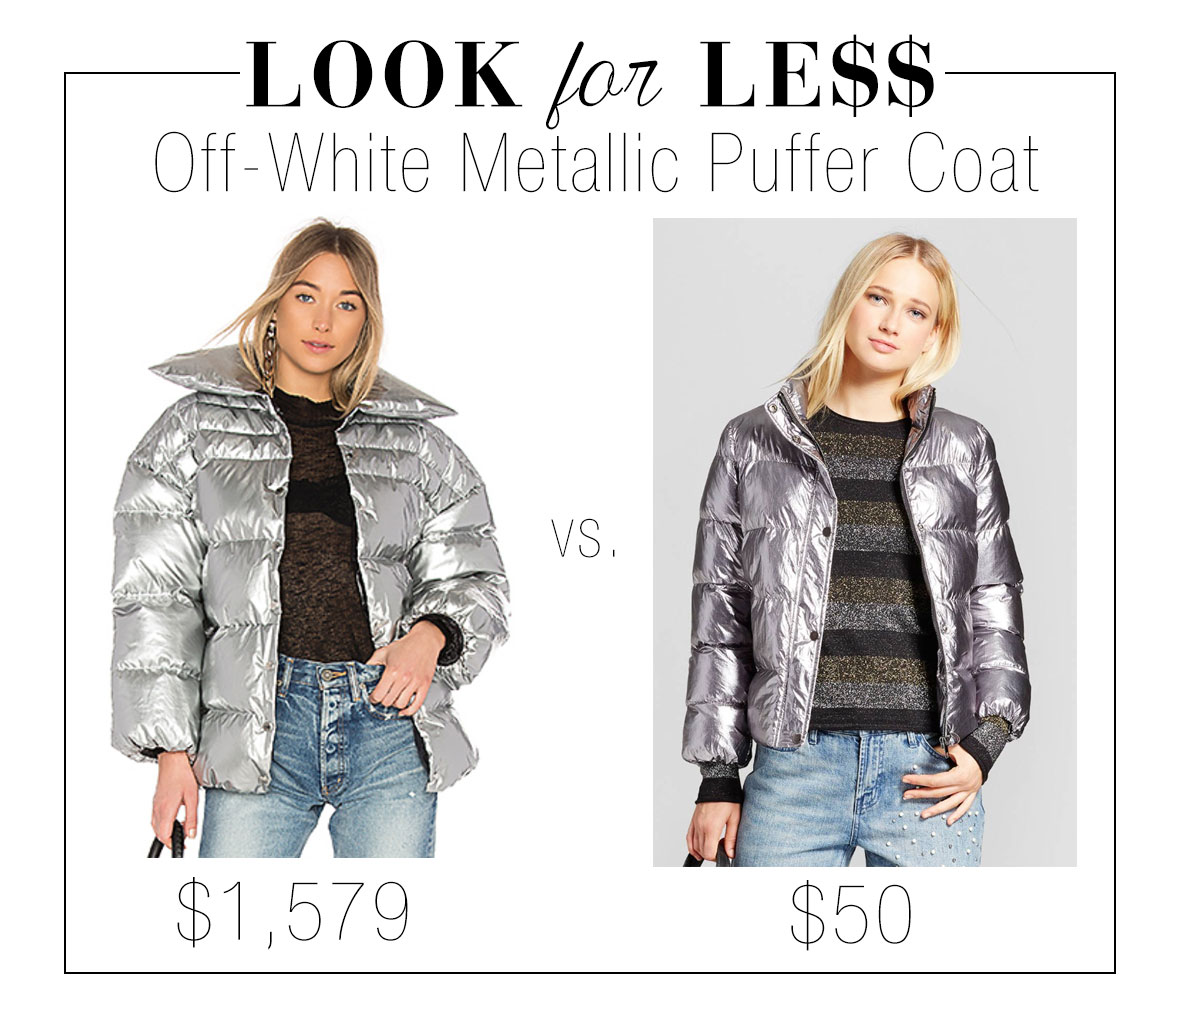 Get the look of Off-White's silver metallic puffer coat for less.